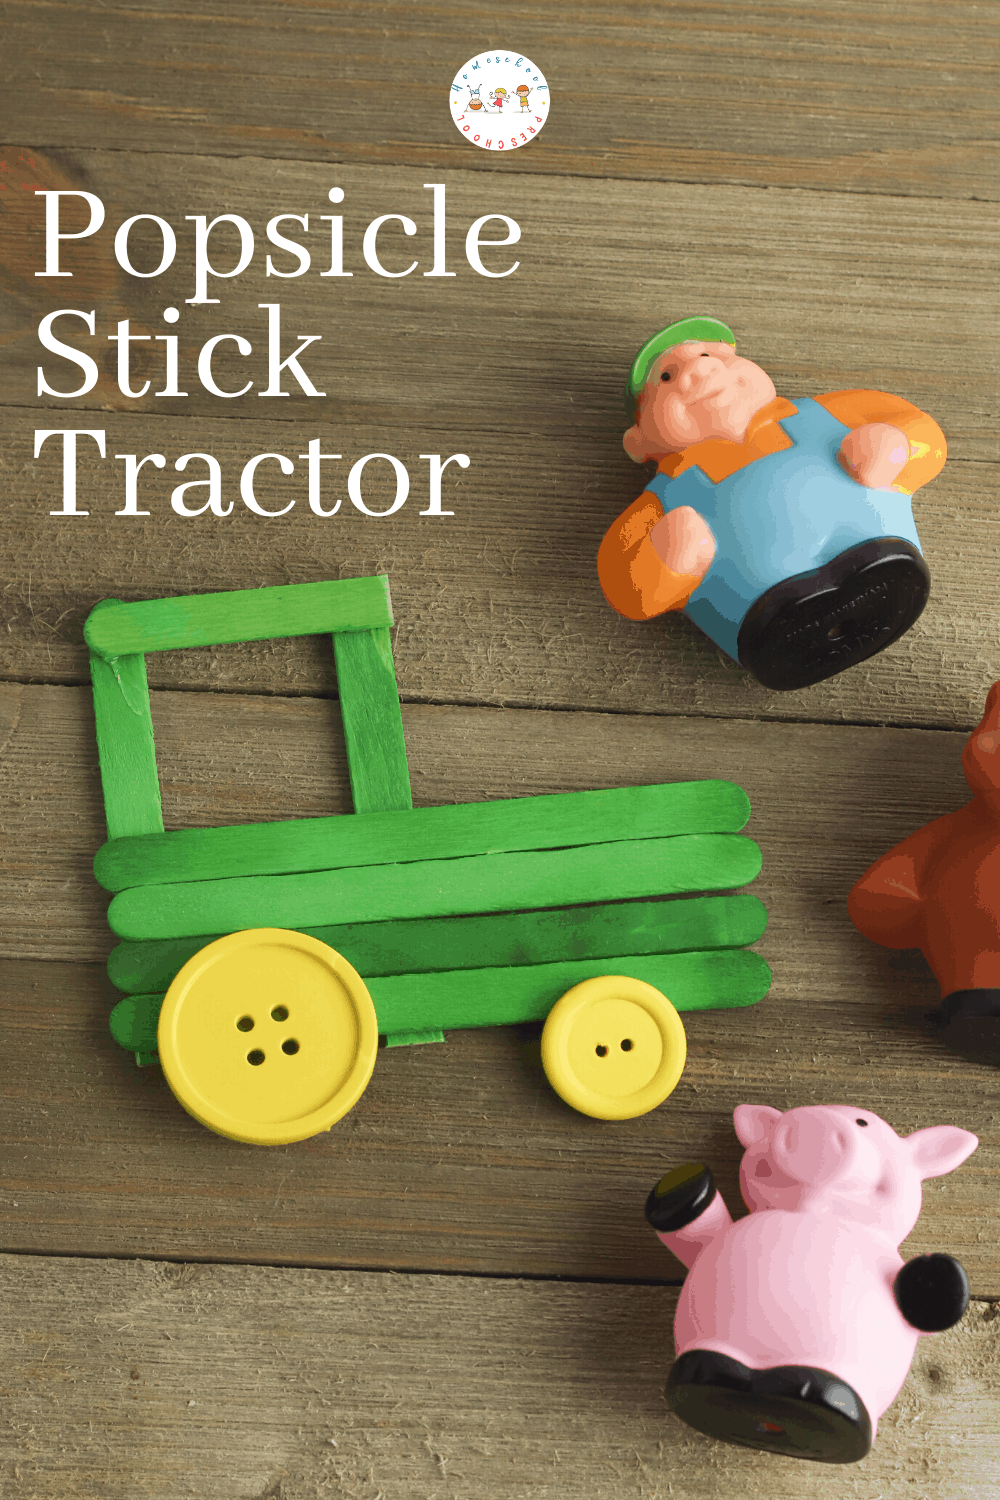 Don't miss this adorable popsicle stick tractor craft for preschool kiddos! Add it to your farm or transportation themes for a fun craft activity.